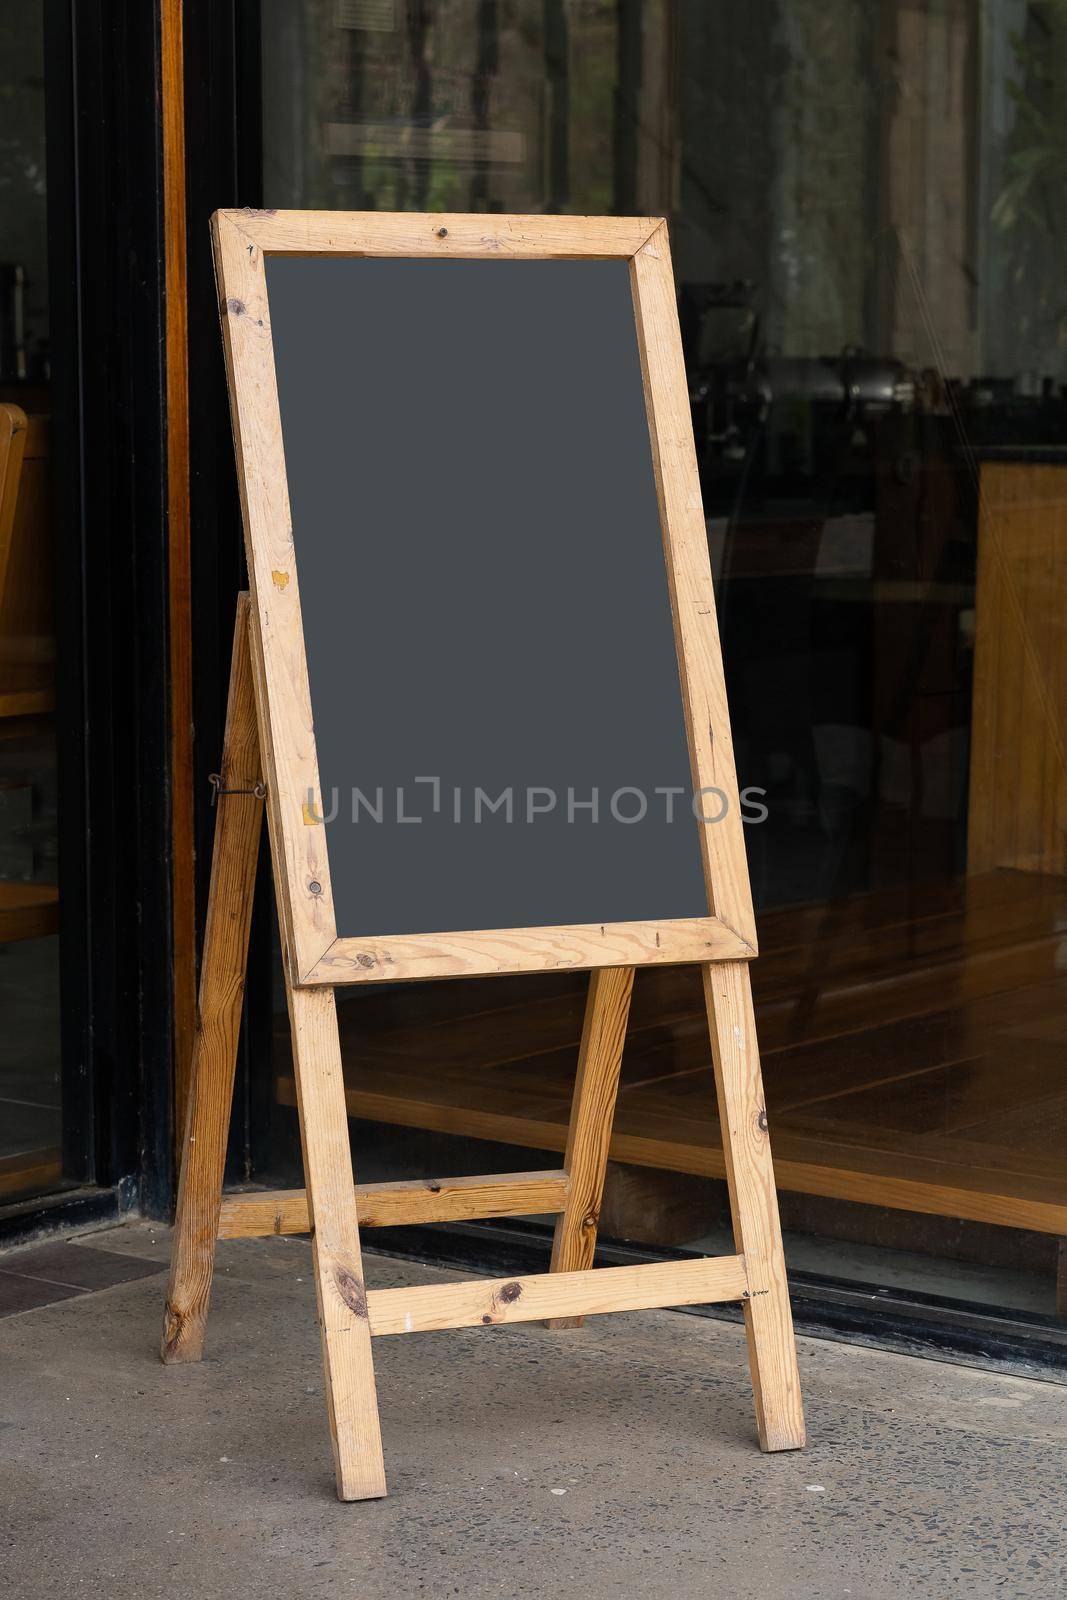 Old blackboard stand in front of restaurant or cafe, empty for advertising display